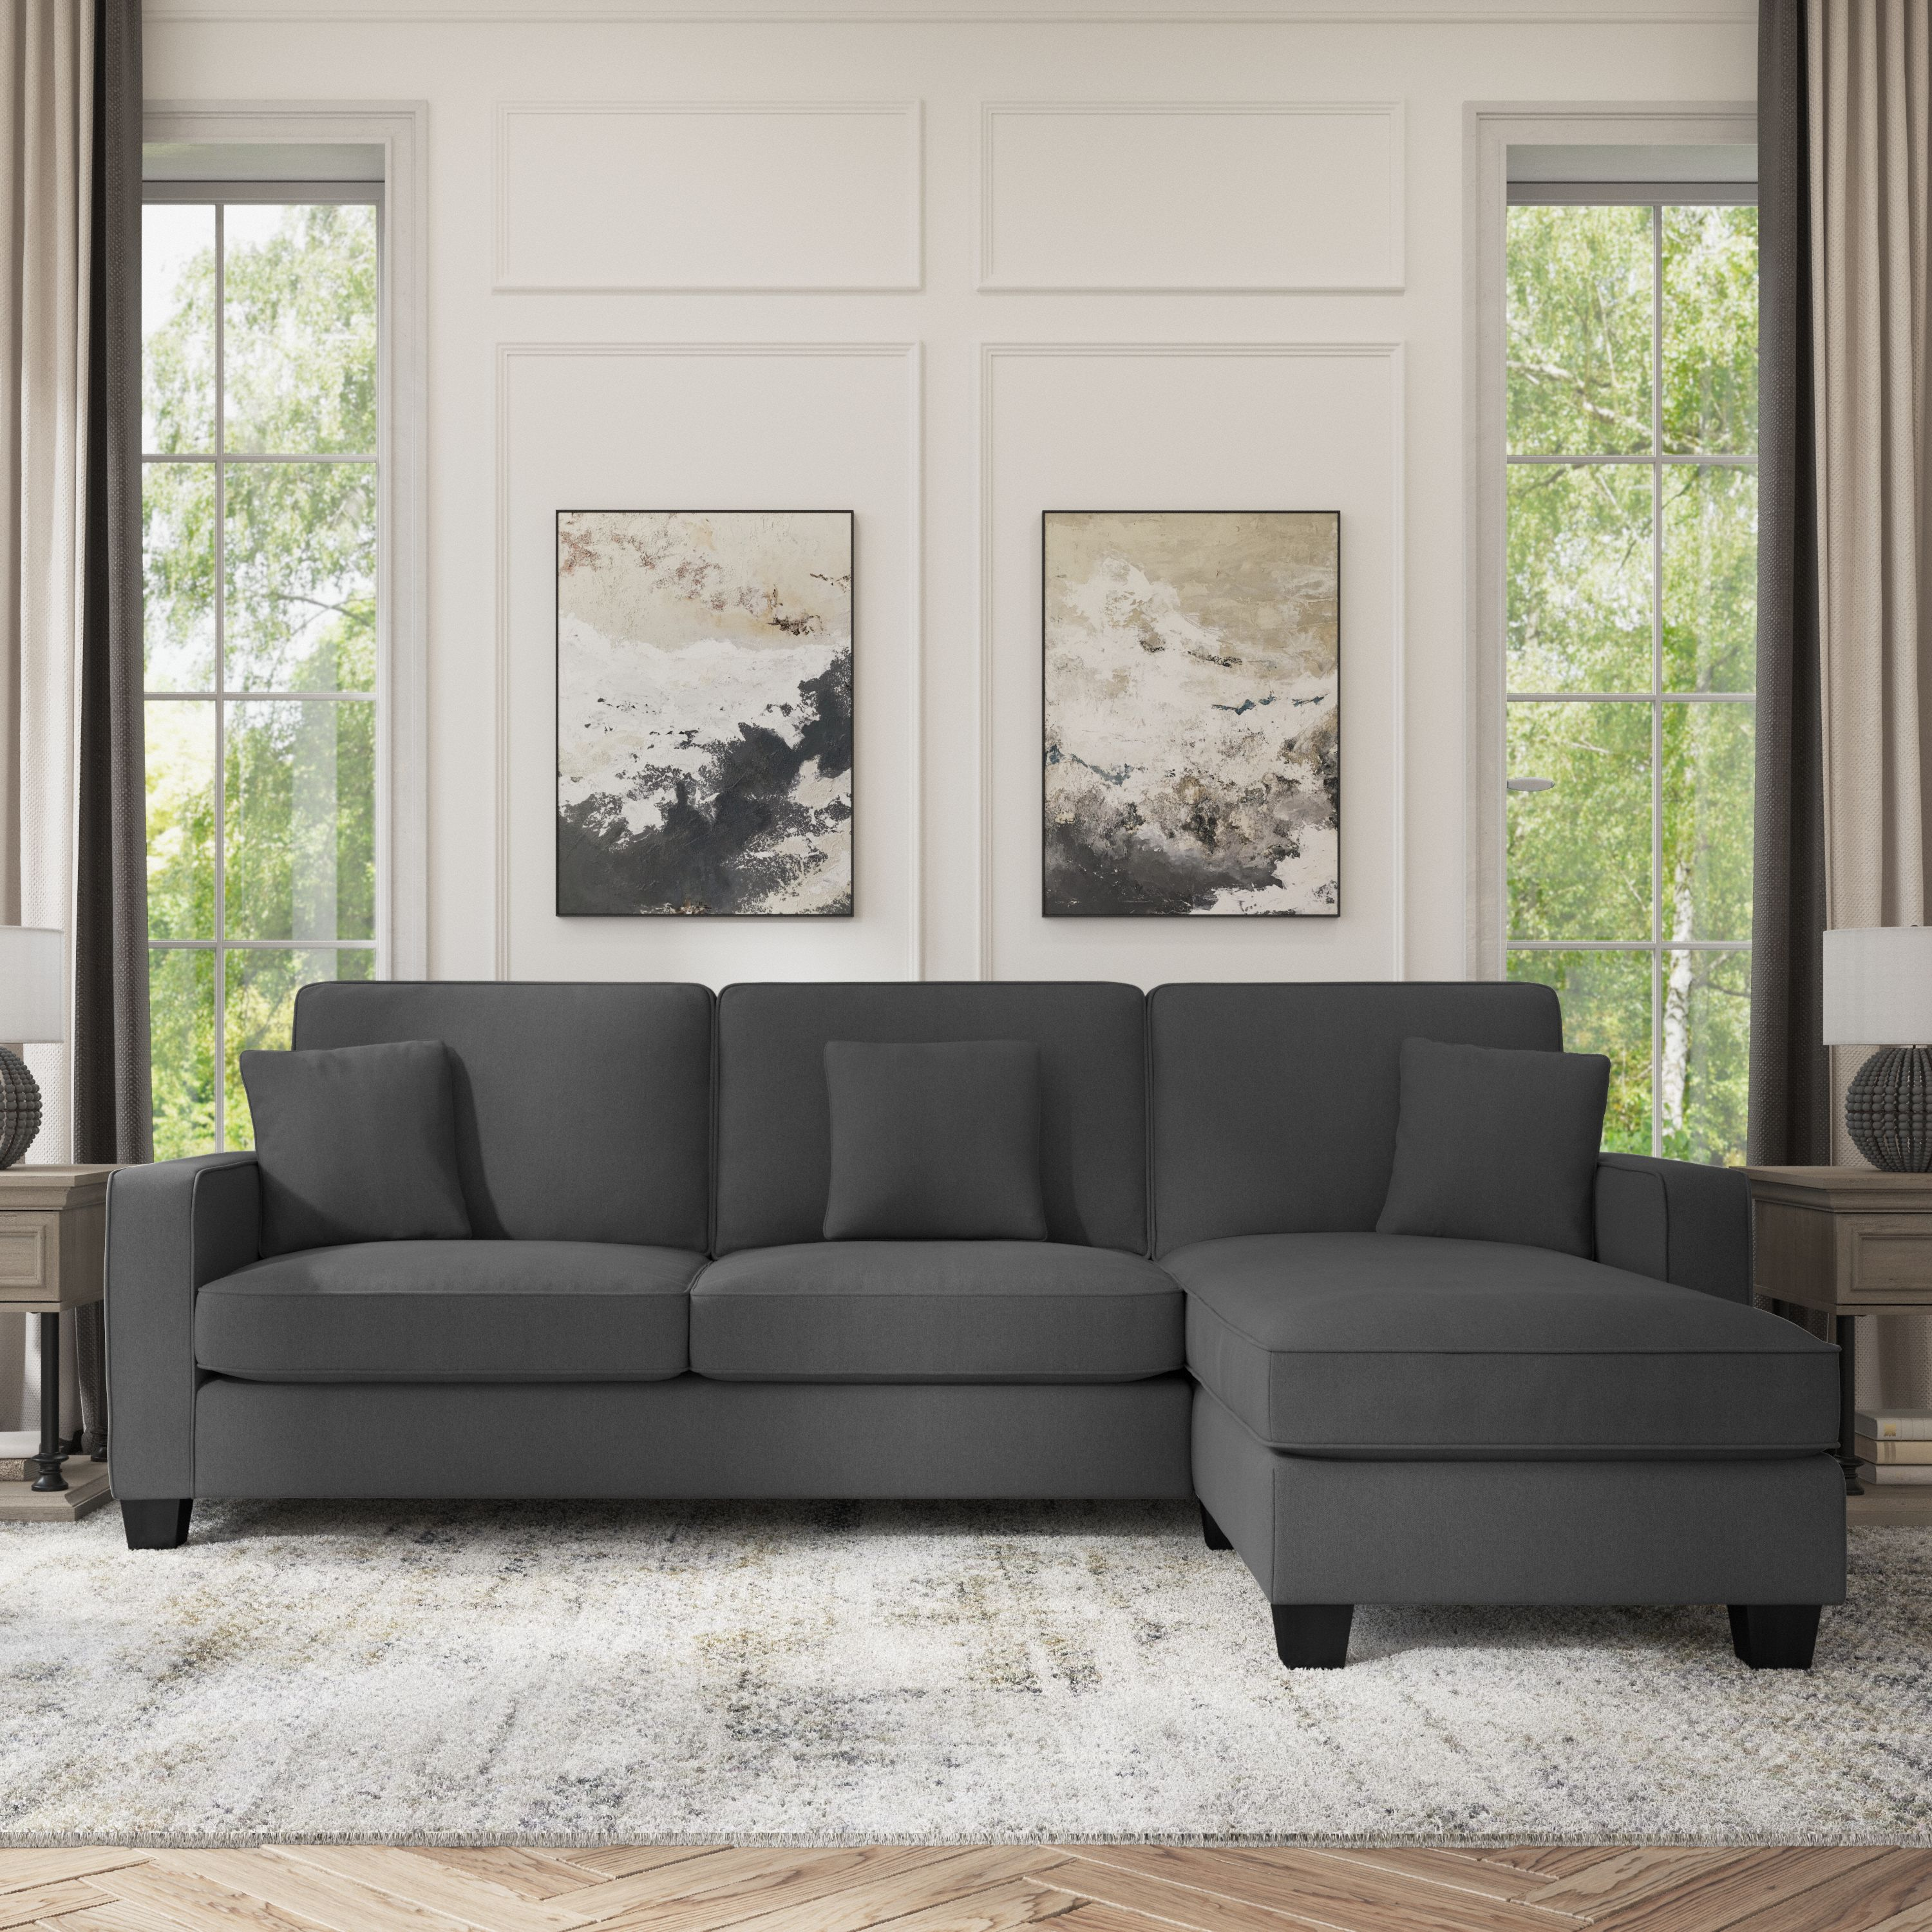 Shop Bush Furniture Stockton 102W Sectional Couch with Reversible Chaise Lounge 01 SNY102SCGH-03K #color_charcoal gray herringbone fabr